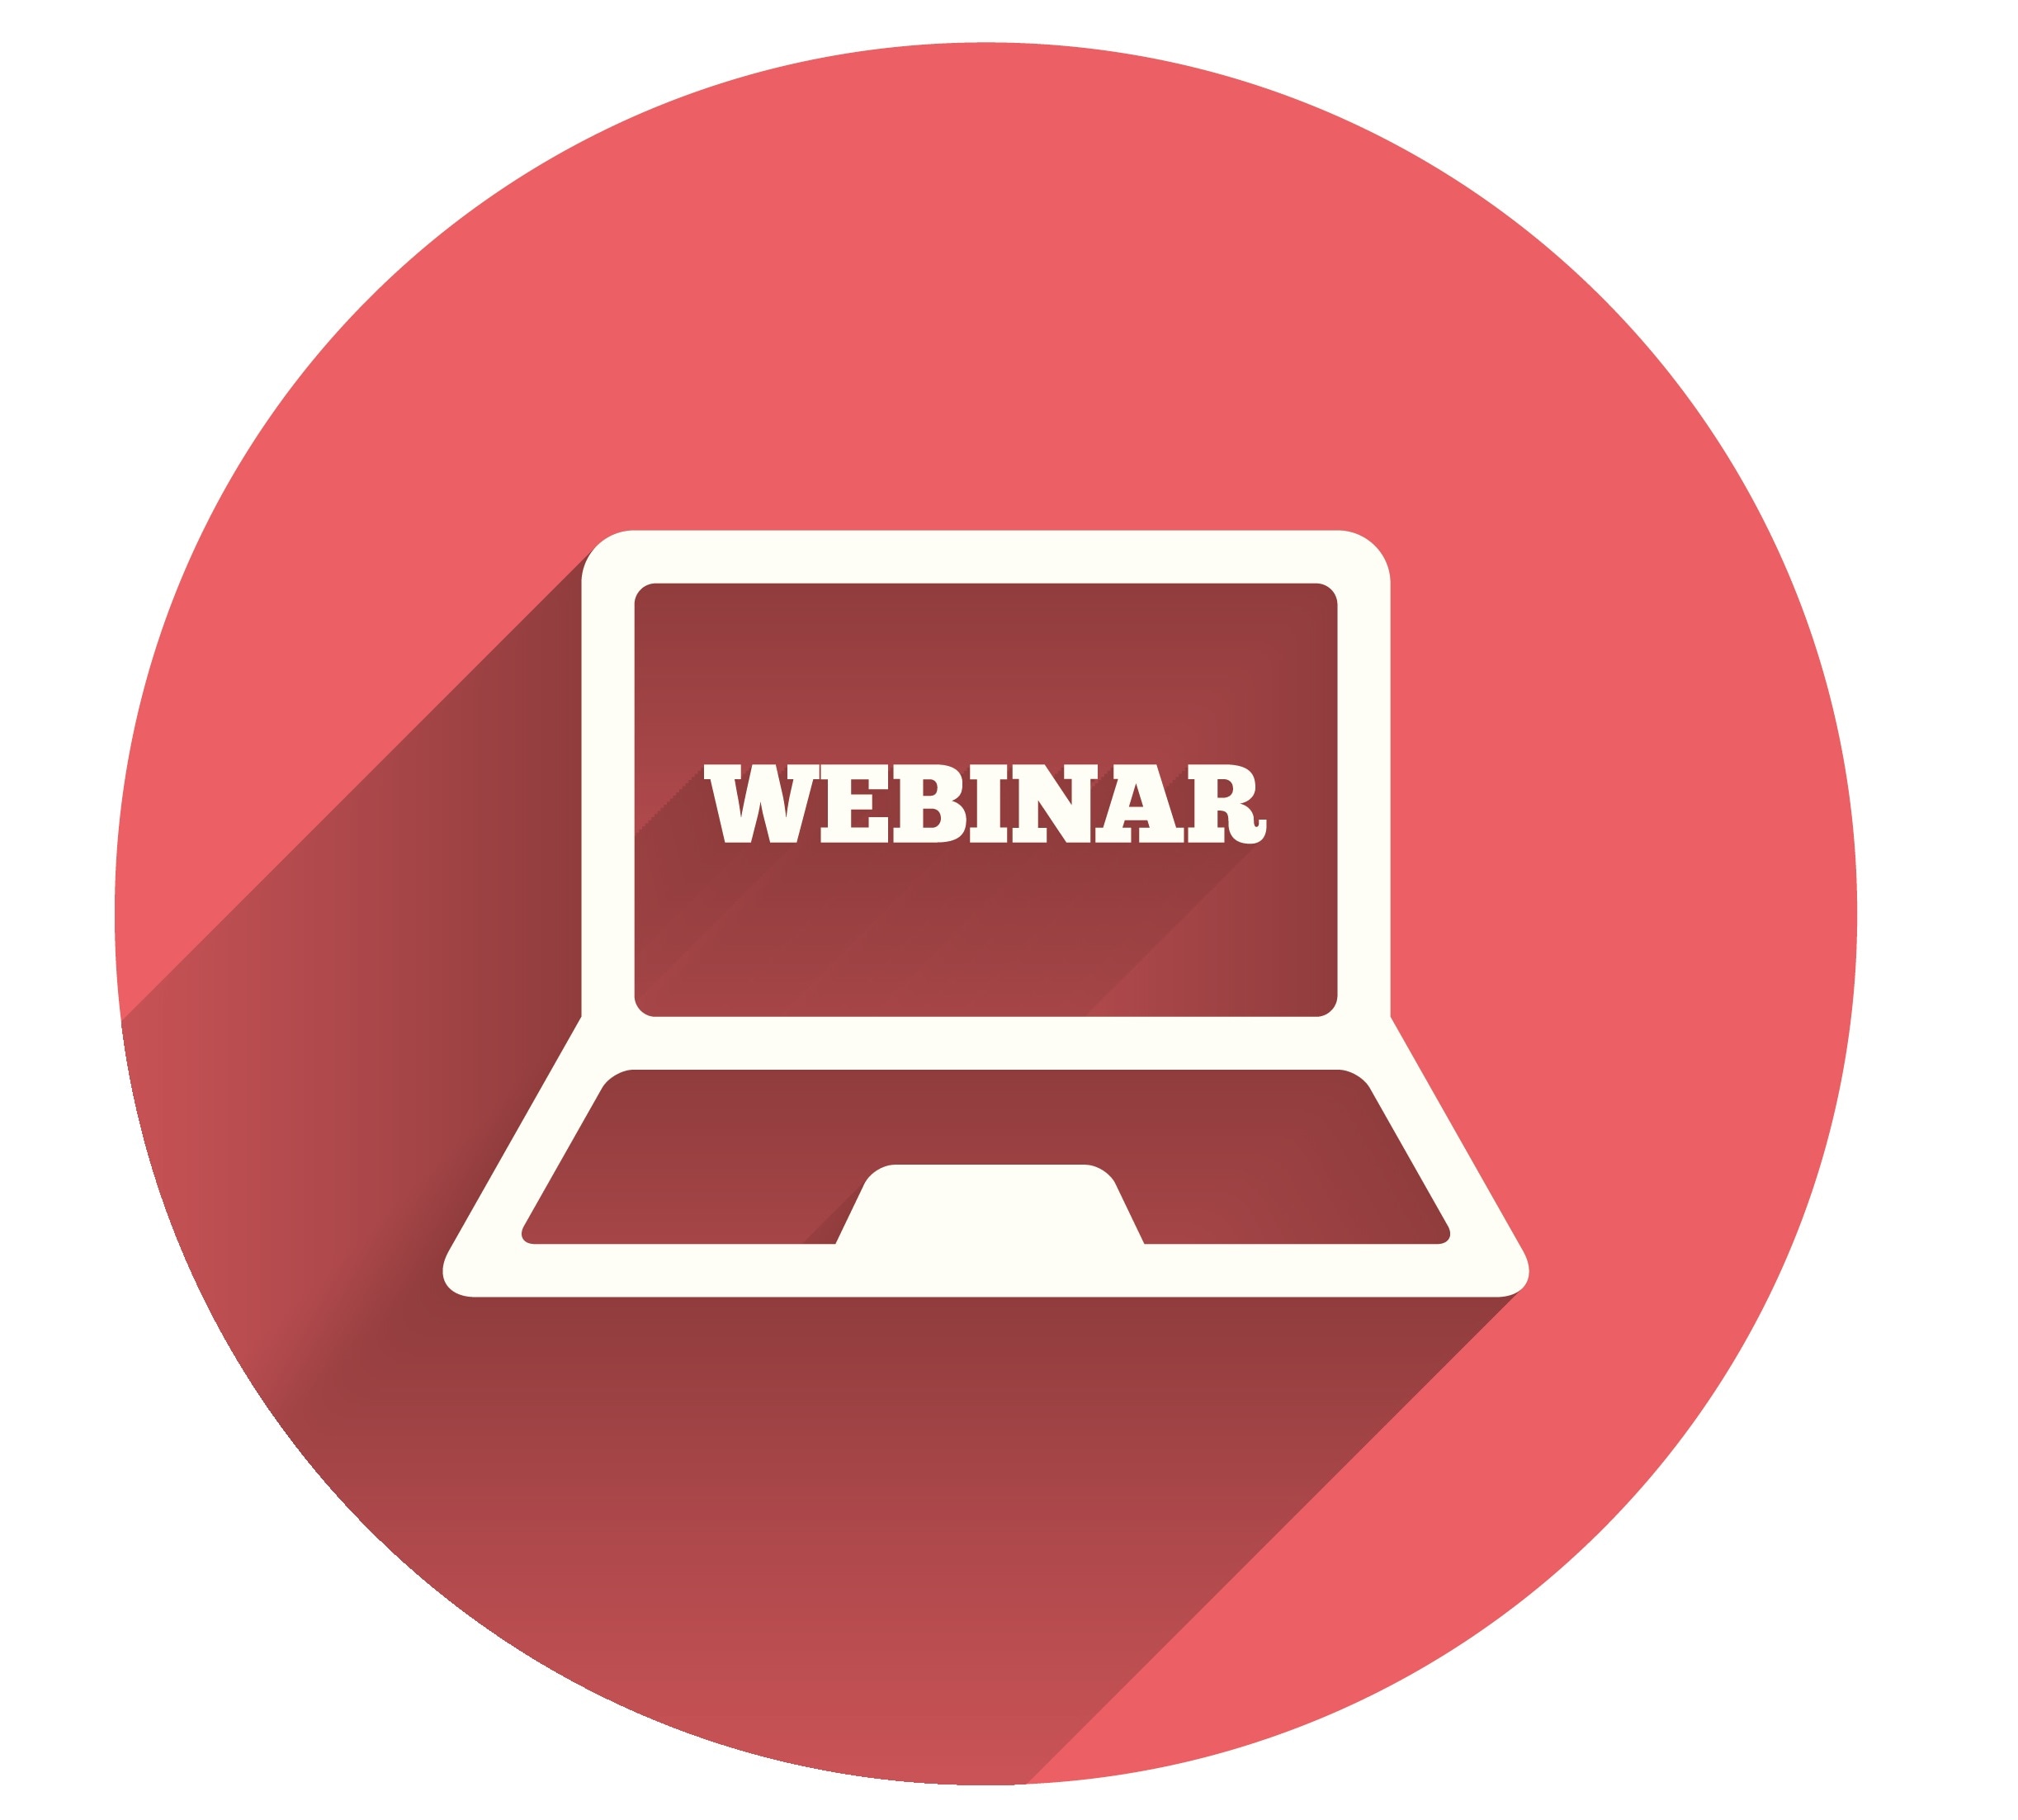 Listen back to our free on-demand webinar